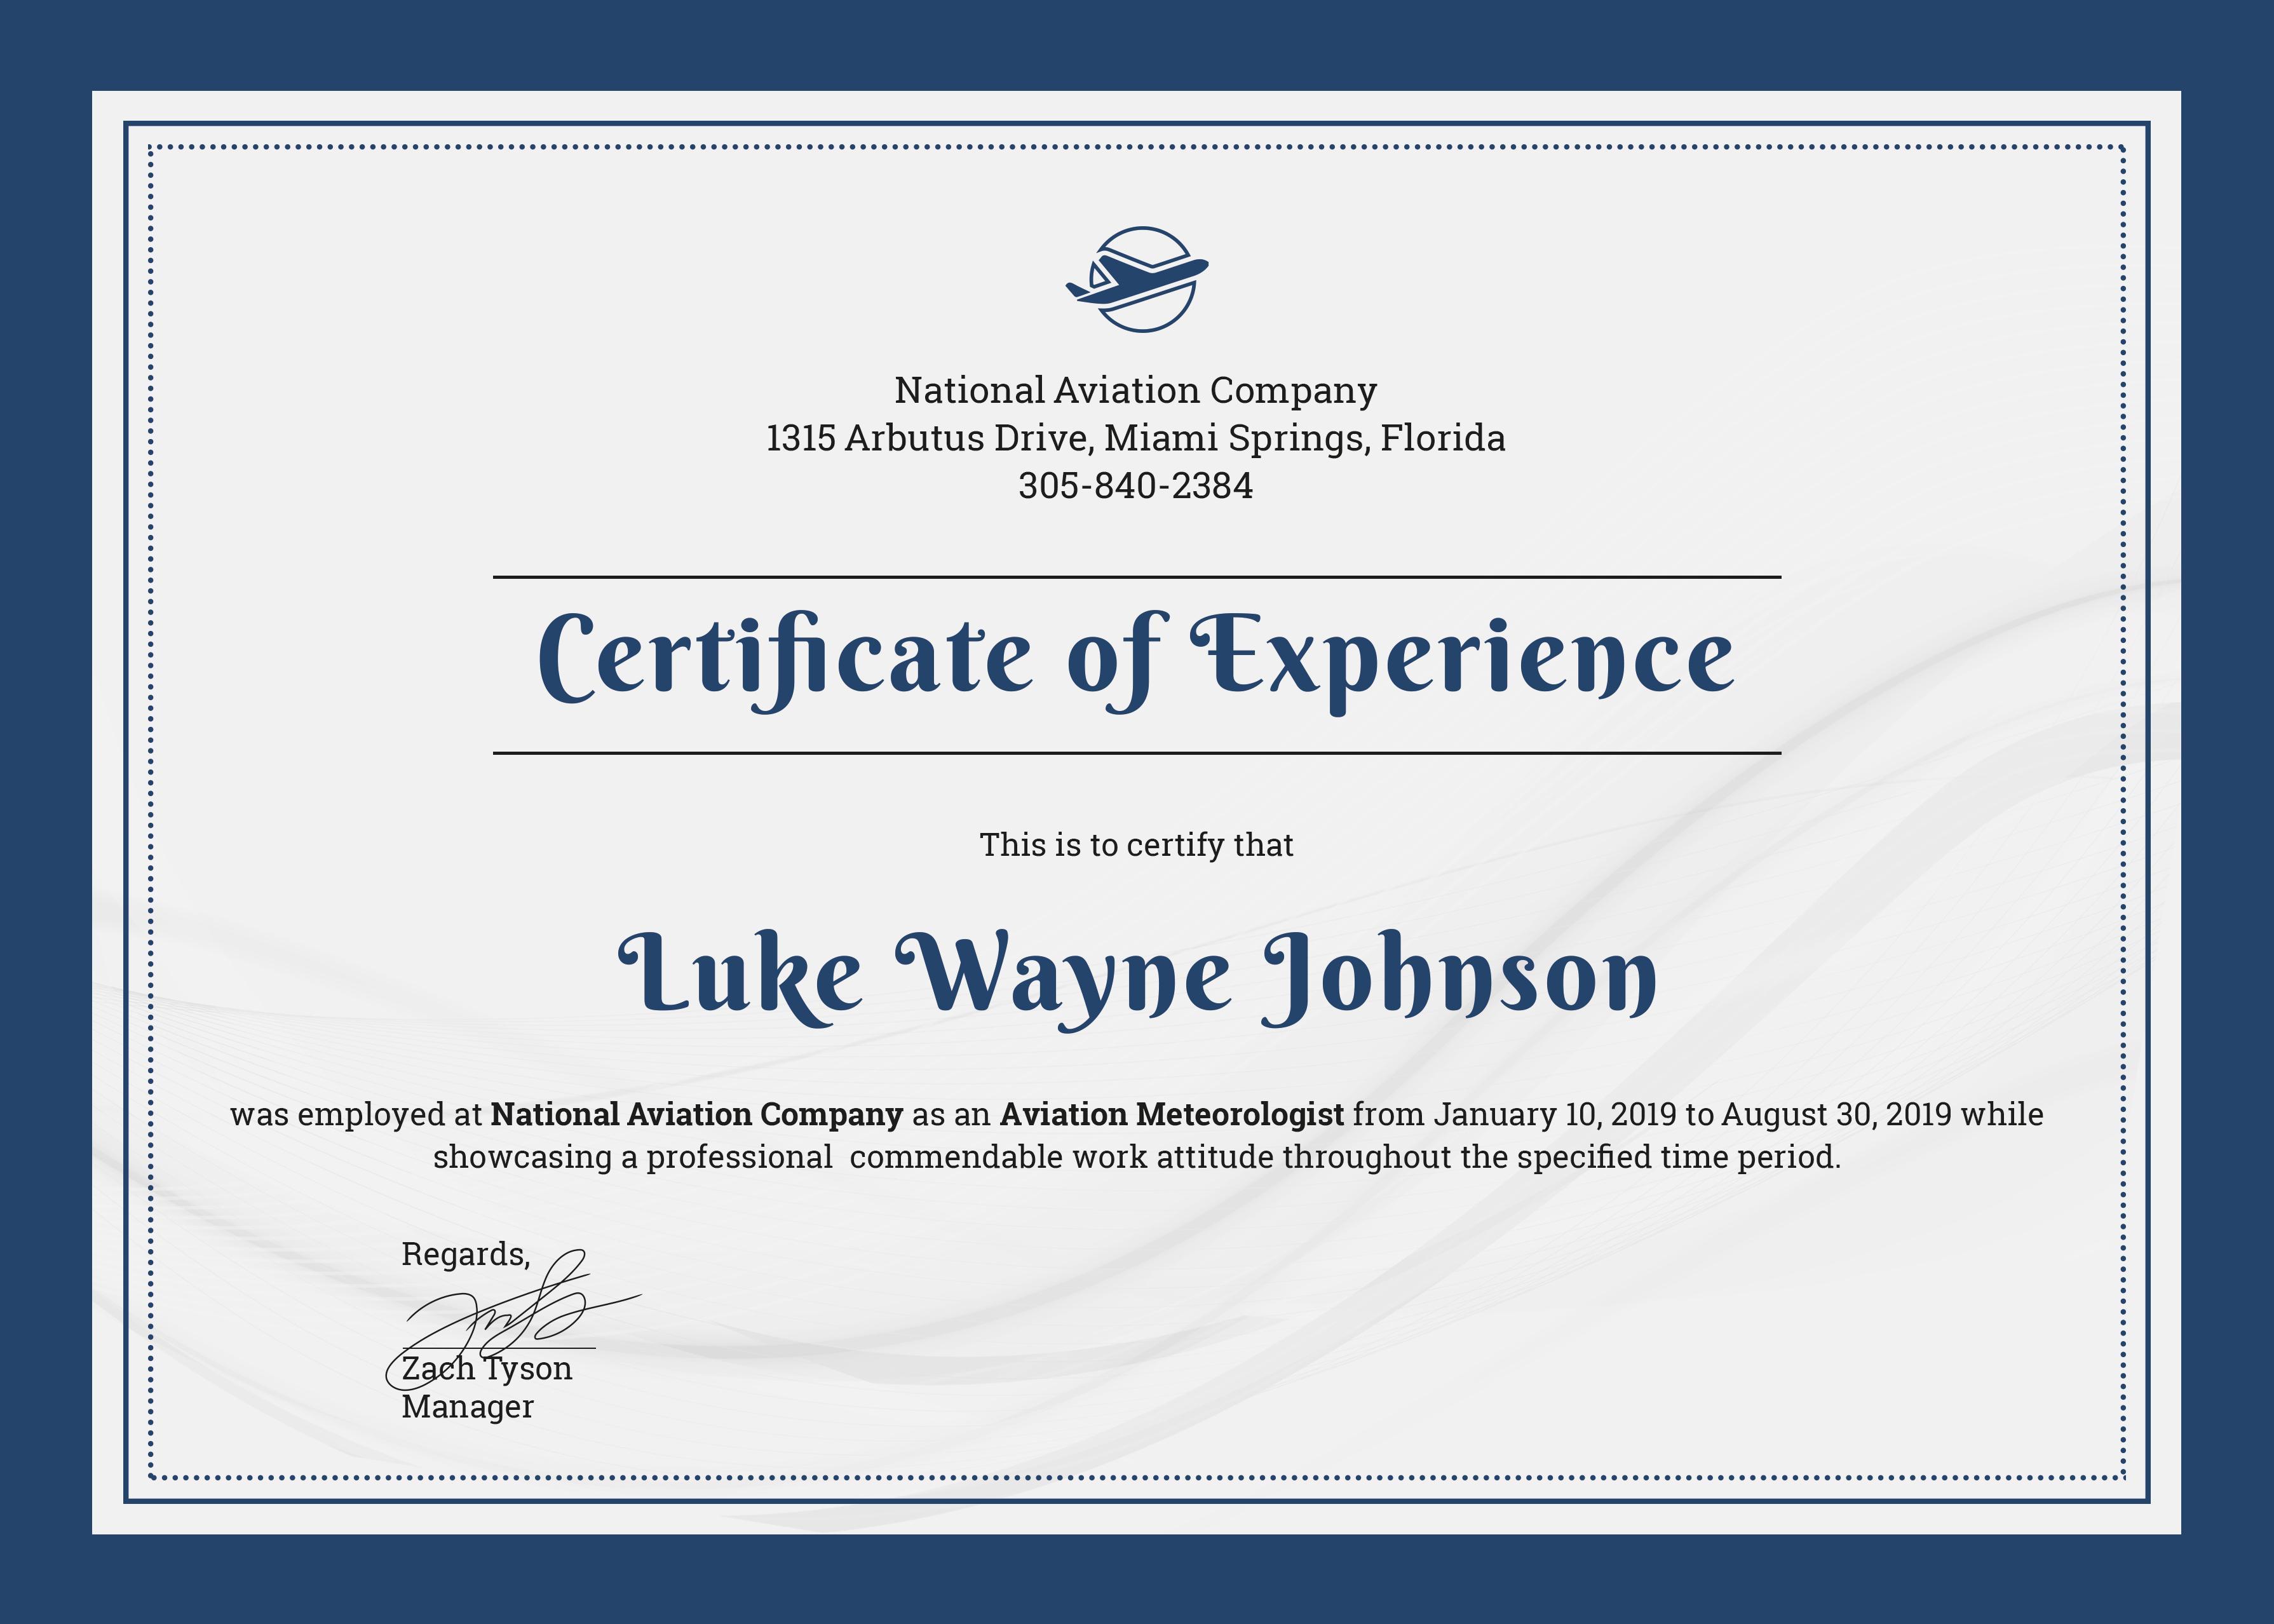 Certificate of Experience Sample